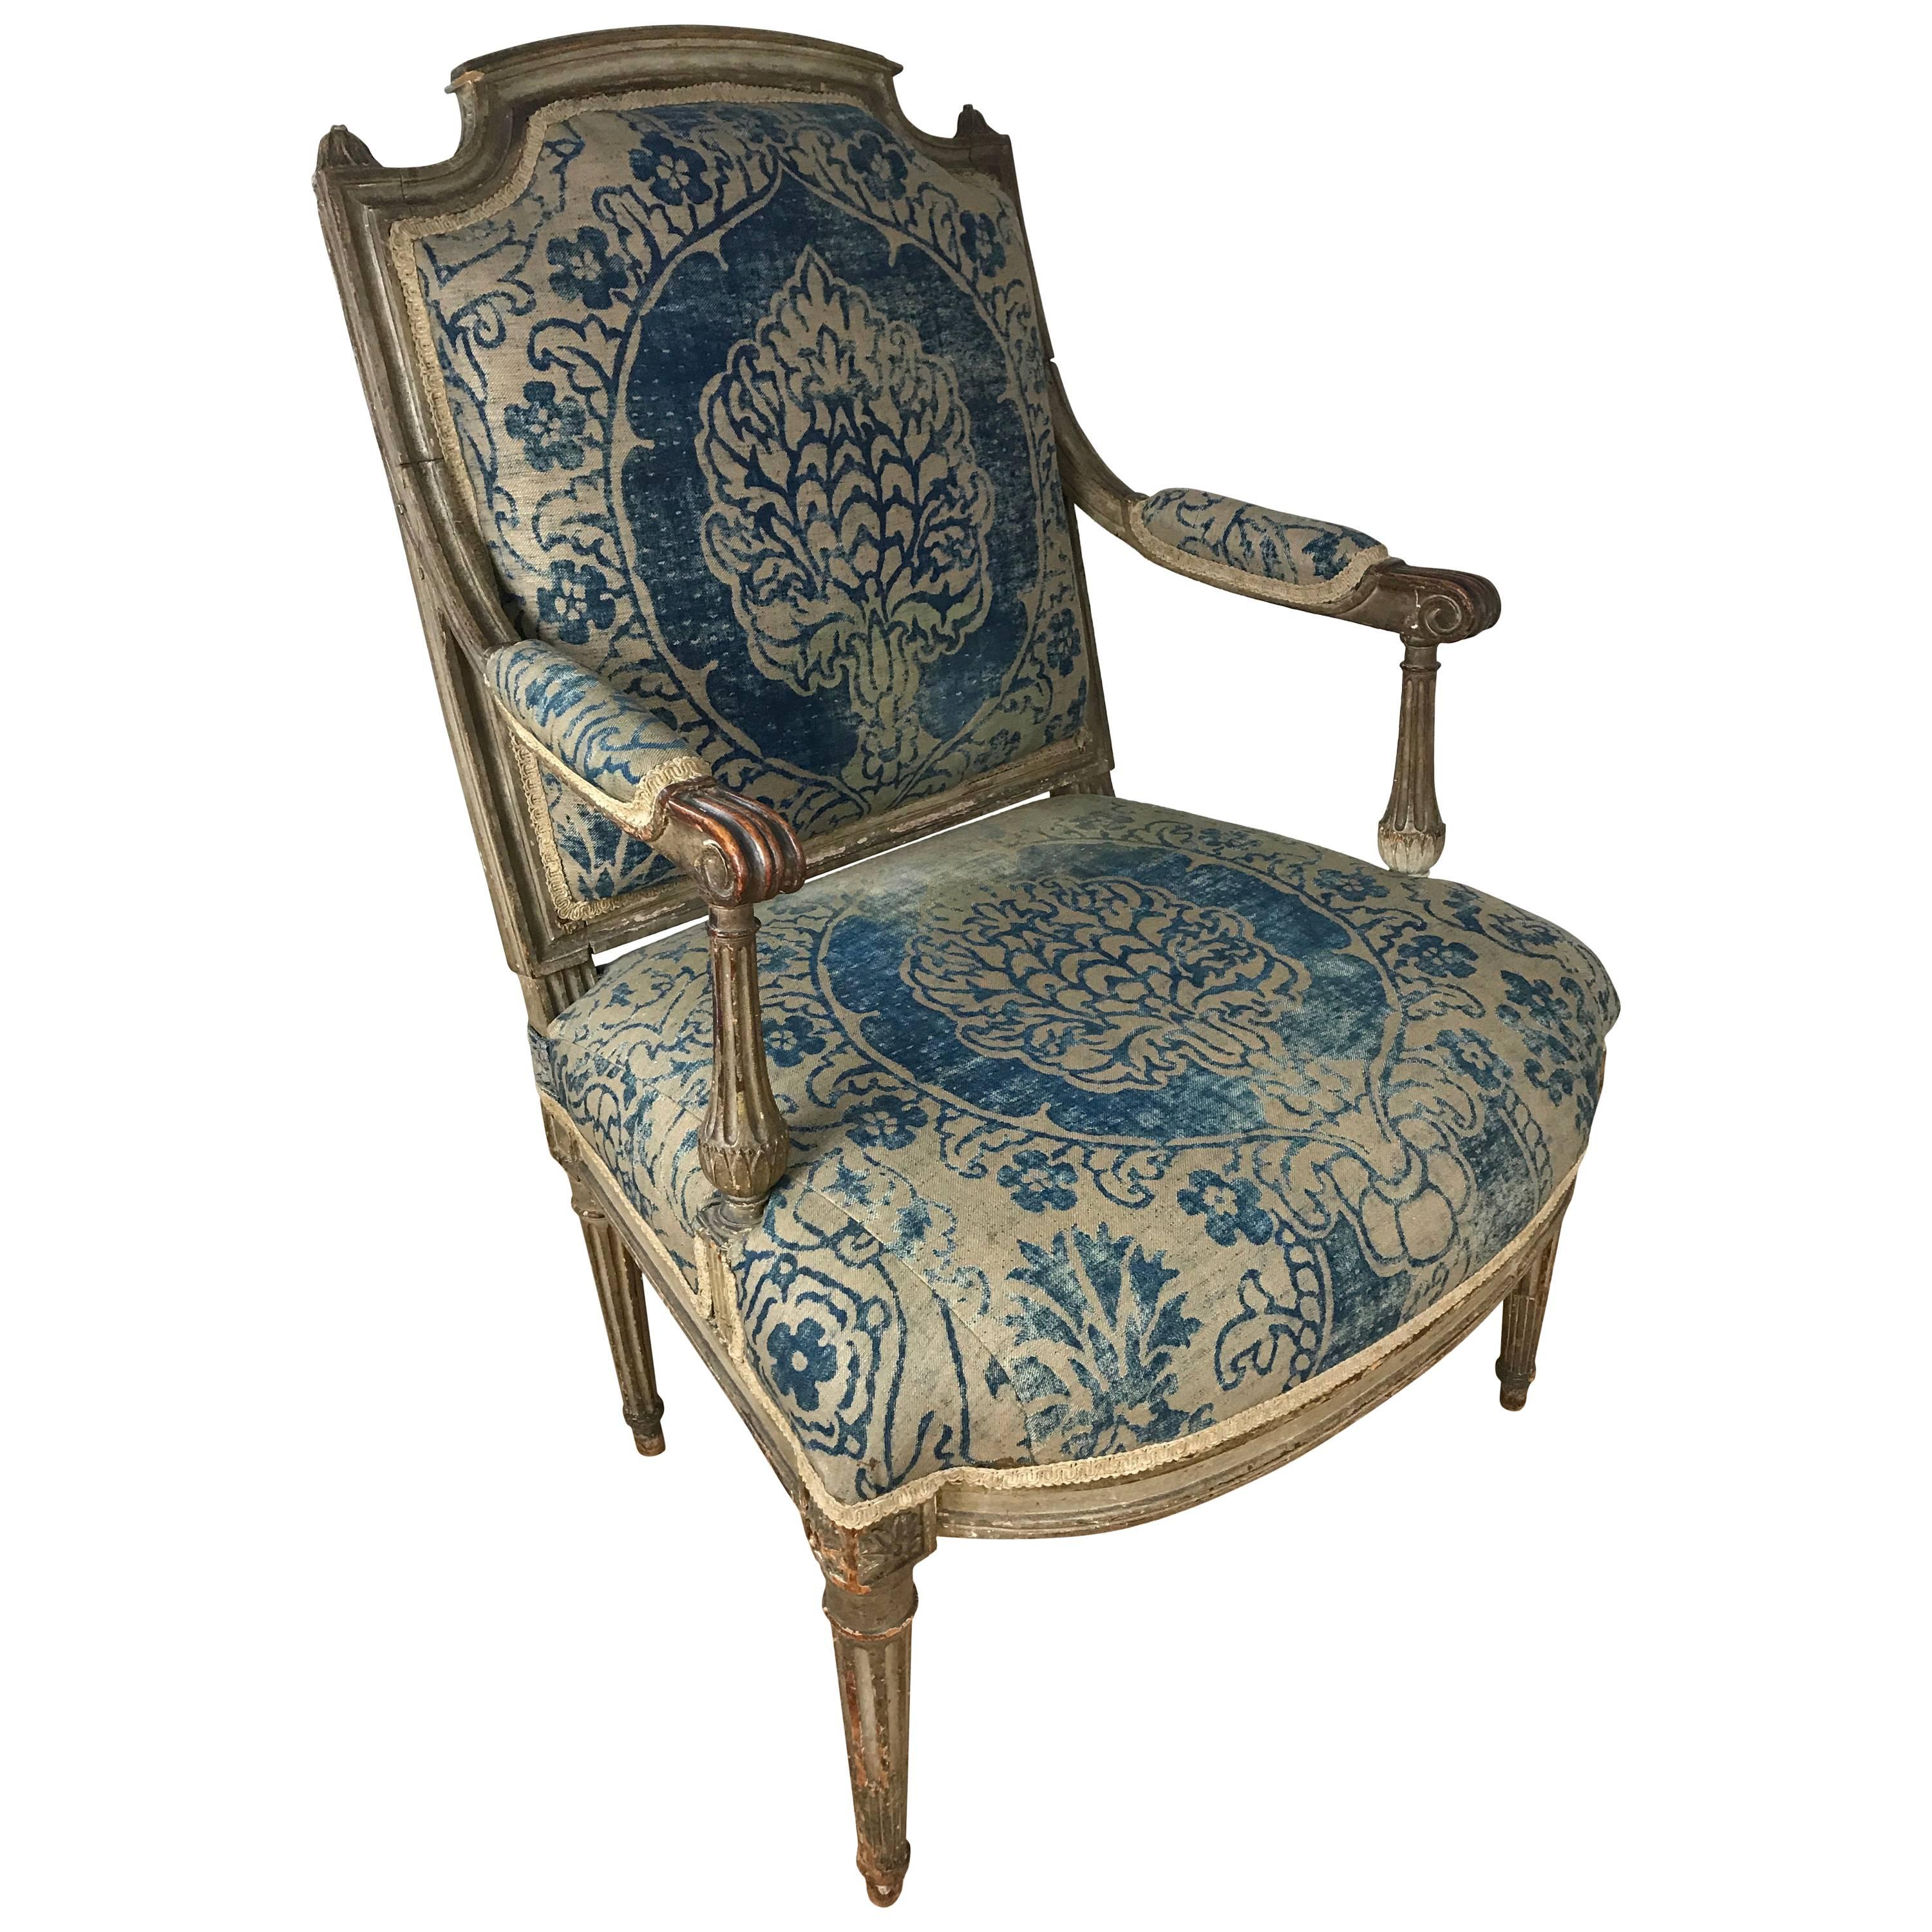 A lovely 18th century Louis XVI chair upholstered in original Fortuny fabric.